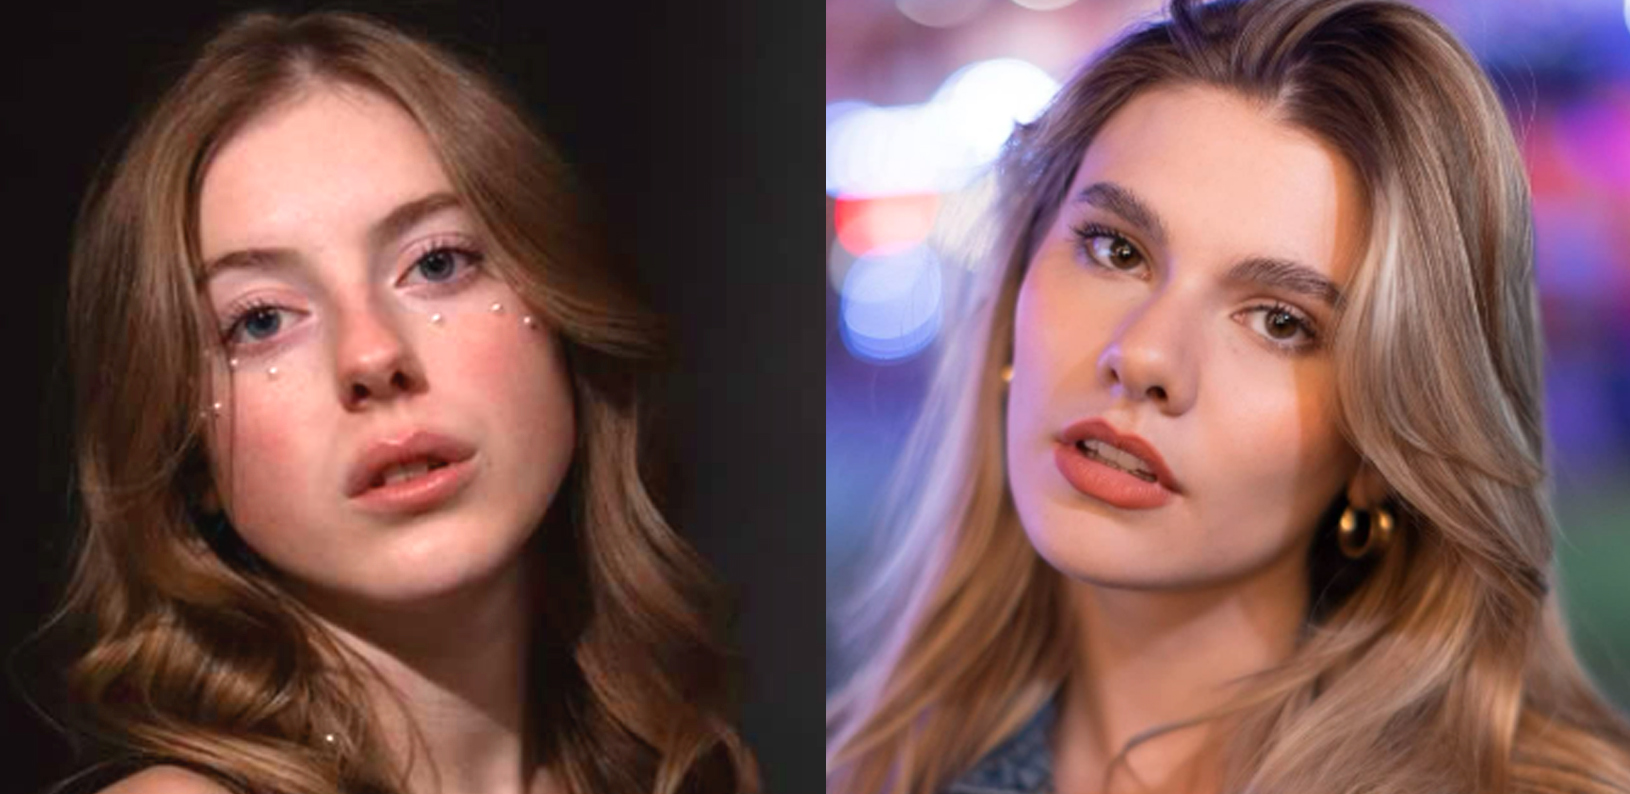 Lydia Perl Pentz and Cali Scolari lead the Cast of Timothy Hines' New Comedy Movie 'The Wilde Girls'